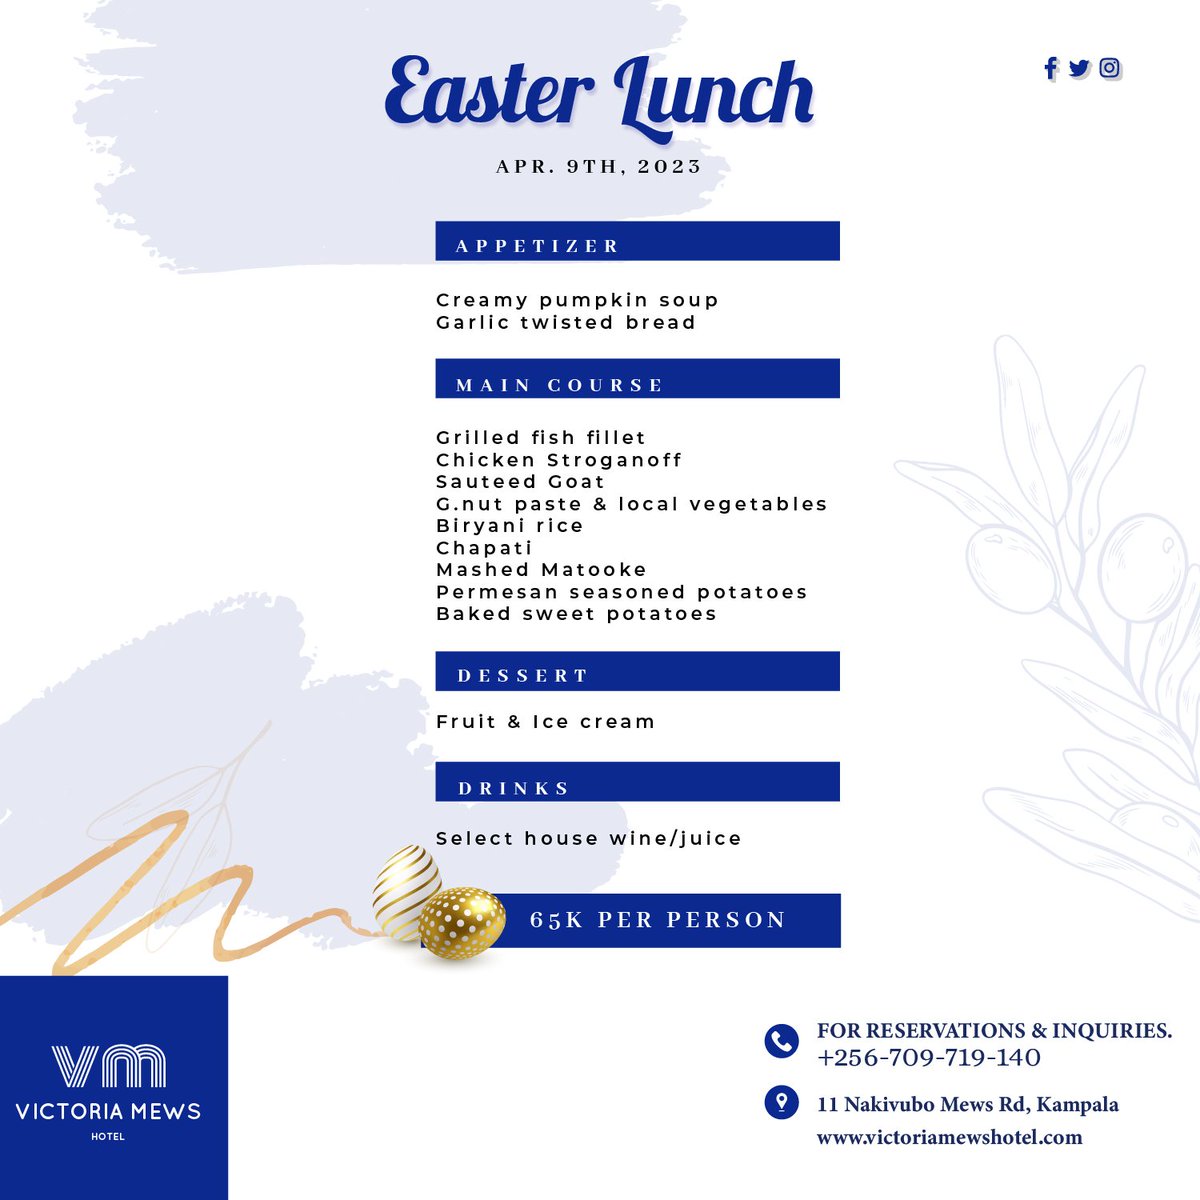 Hop into the Easter spirit with our special lunch at Victoria Mews Hotel! Our chefs have prepared a mouth-watering feast that will tantalize your taste buds and delight your senses. 

#EasterLunch #EasterFeast #LuxuryHotel #VictoriaMewsHotel